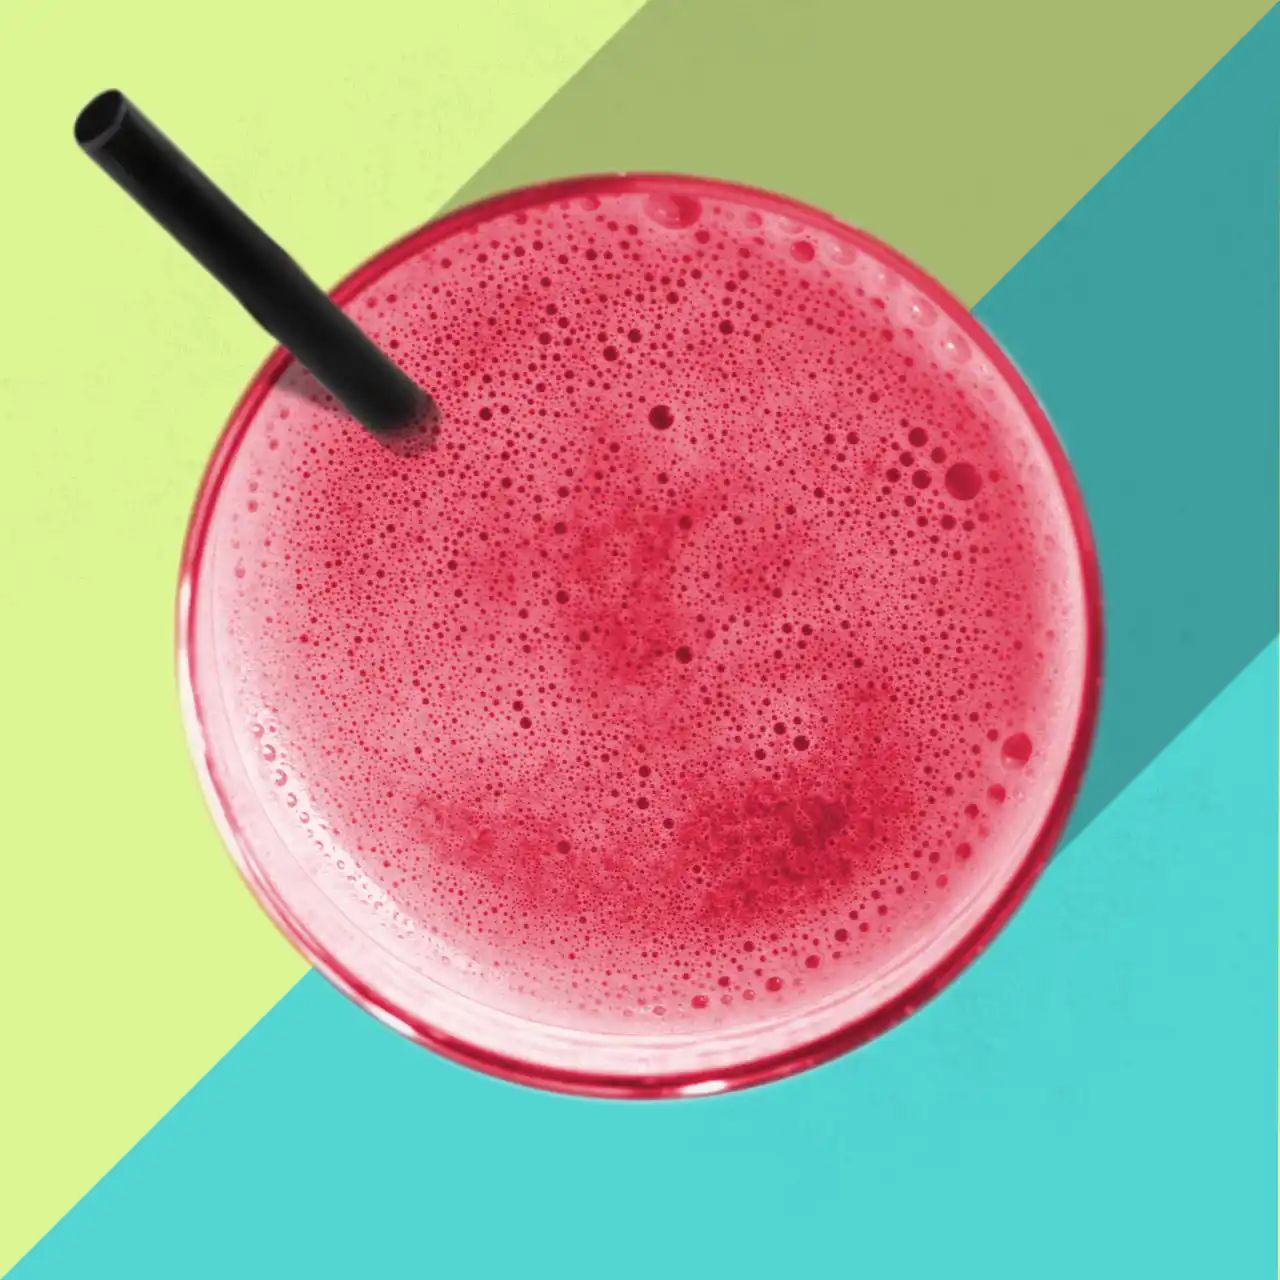 Cucumber, beet root and lime juice recipe - Juizier